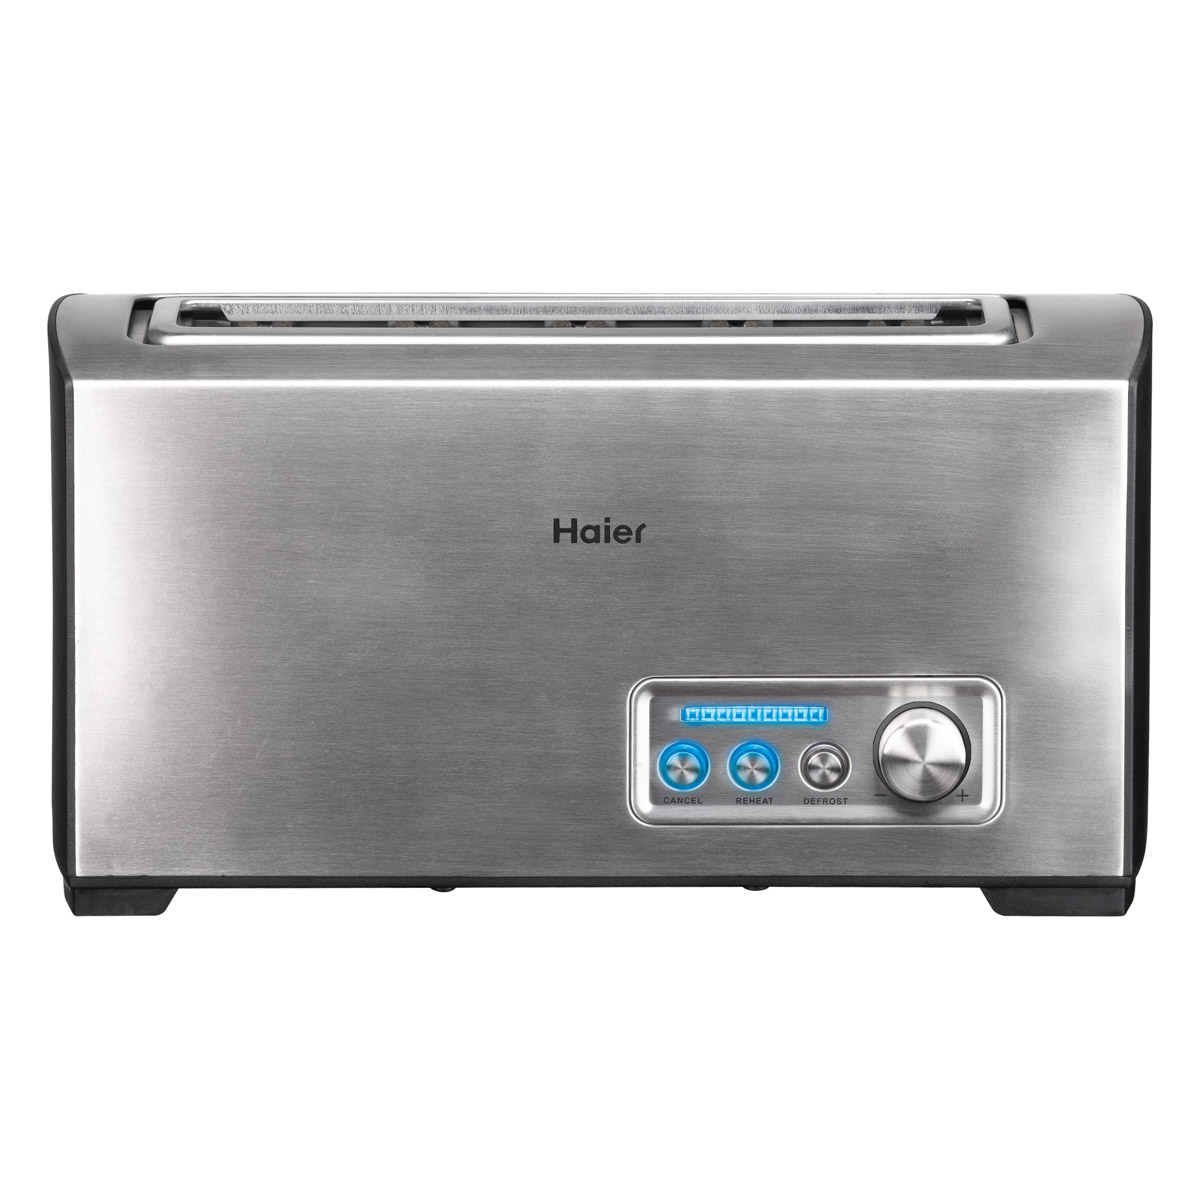 2-slot, 4-slice Brushed Stainless Steel Toaster